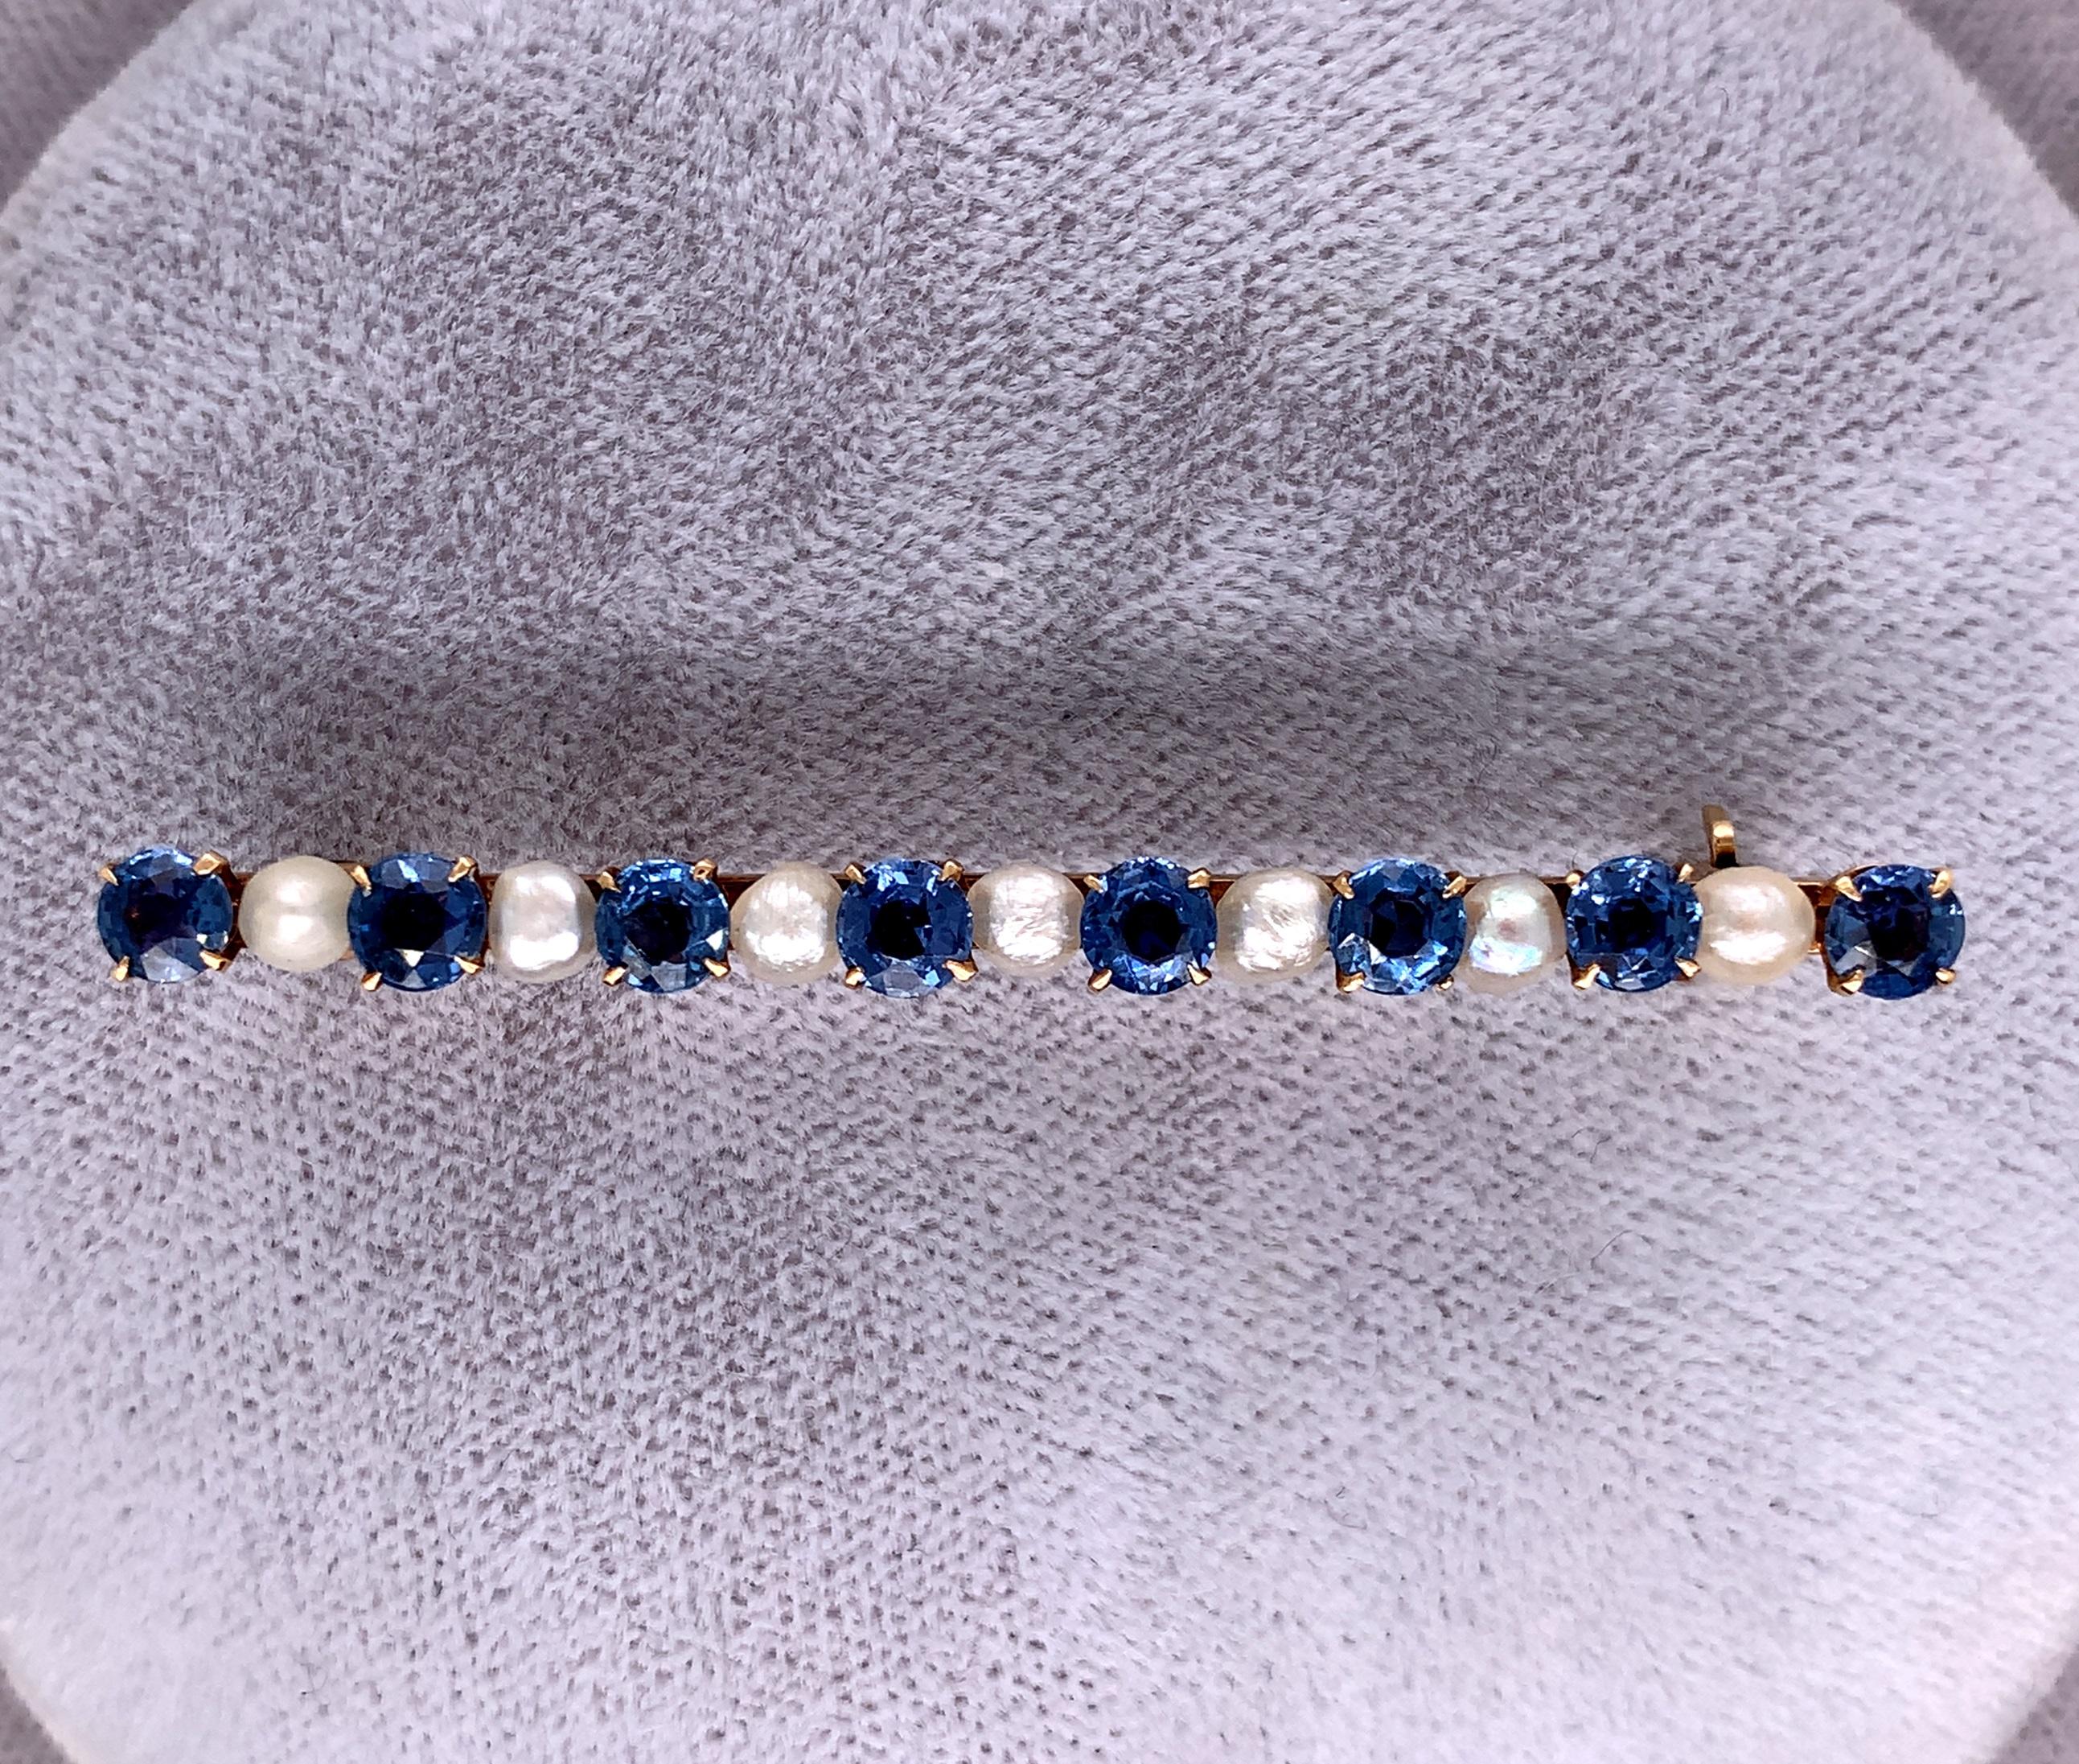  14K yellow gold Victorian bar pin with pearls and  round Montana blue sapphires. The sapphires have cornflower blue color with a hint of periwinkle. The pin measures 2